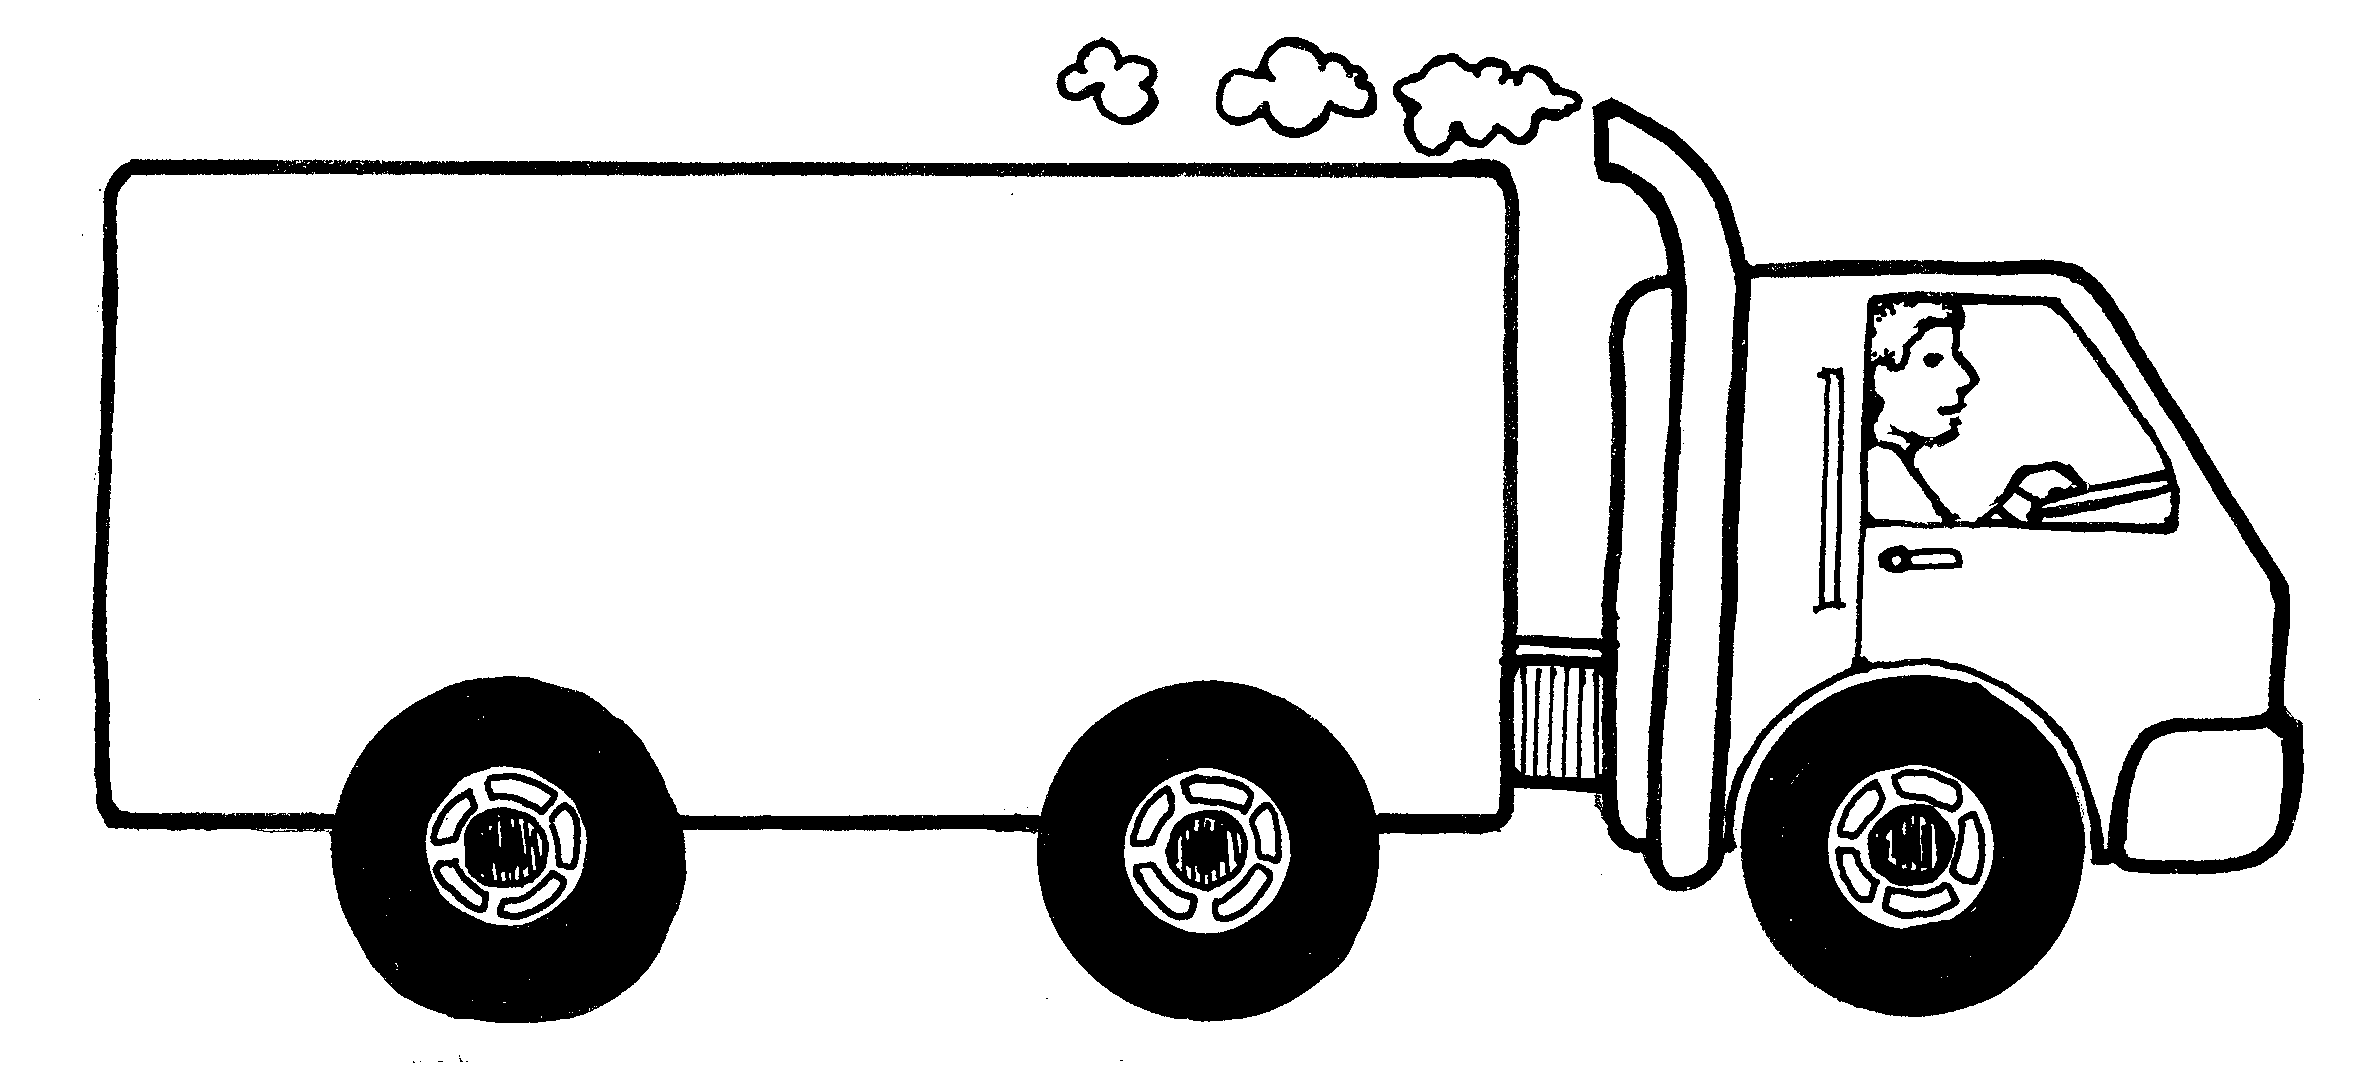 24 Truck Clip Art Free Cliparts That You Can Download To You Computer